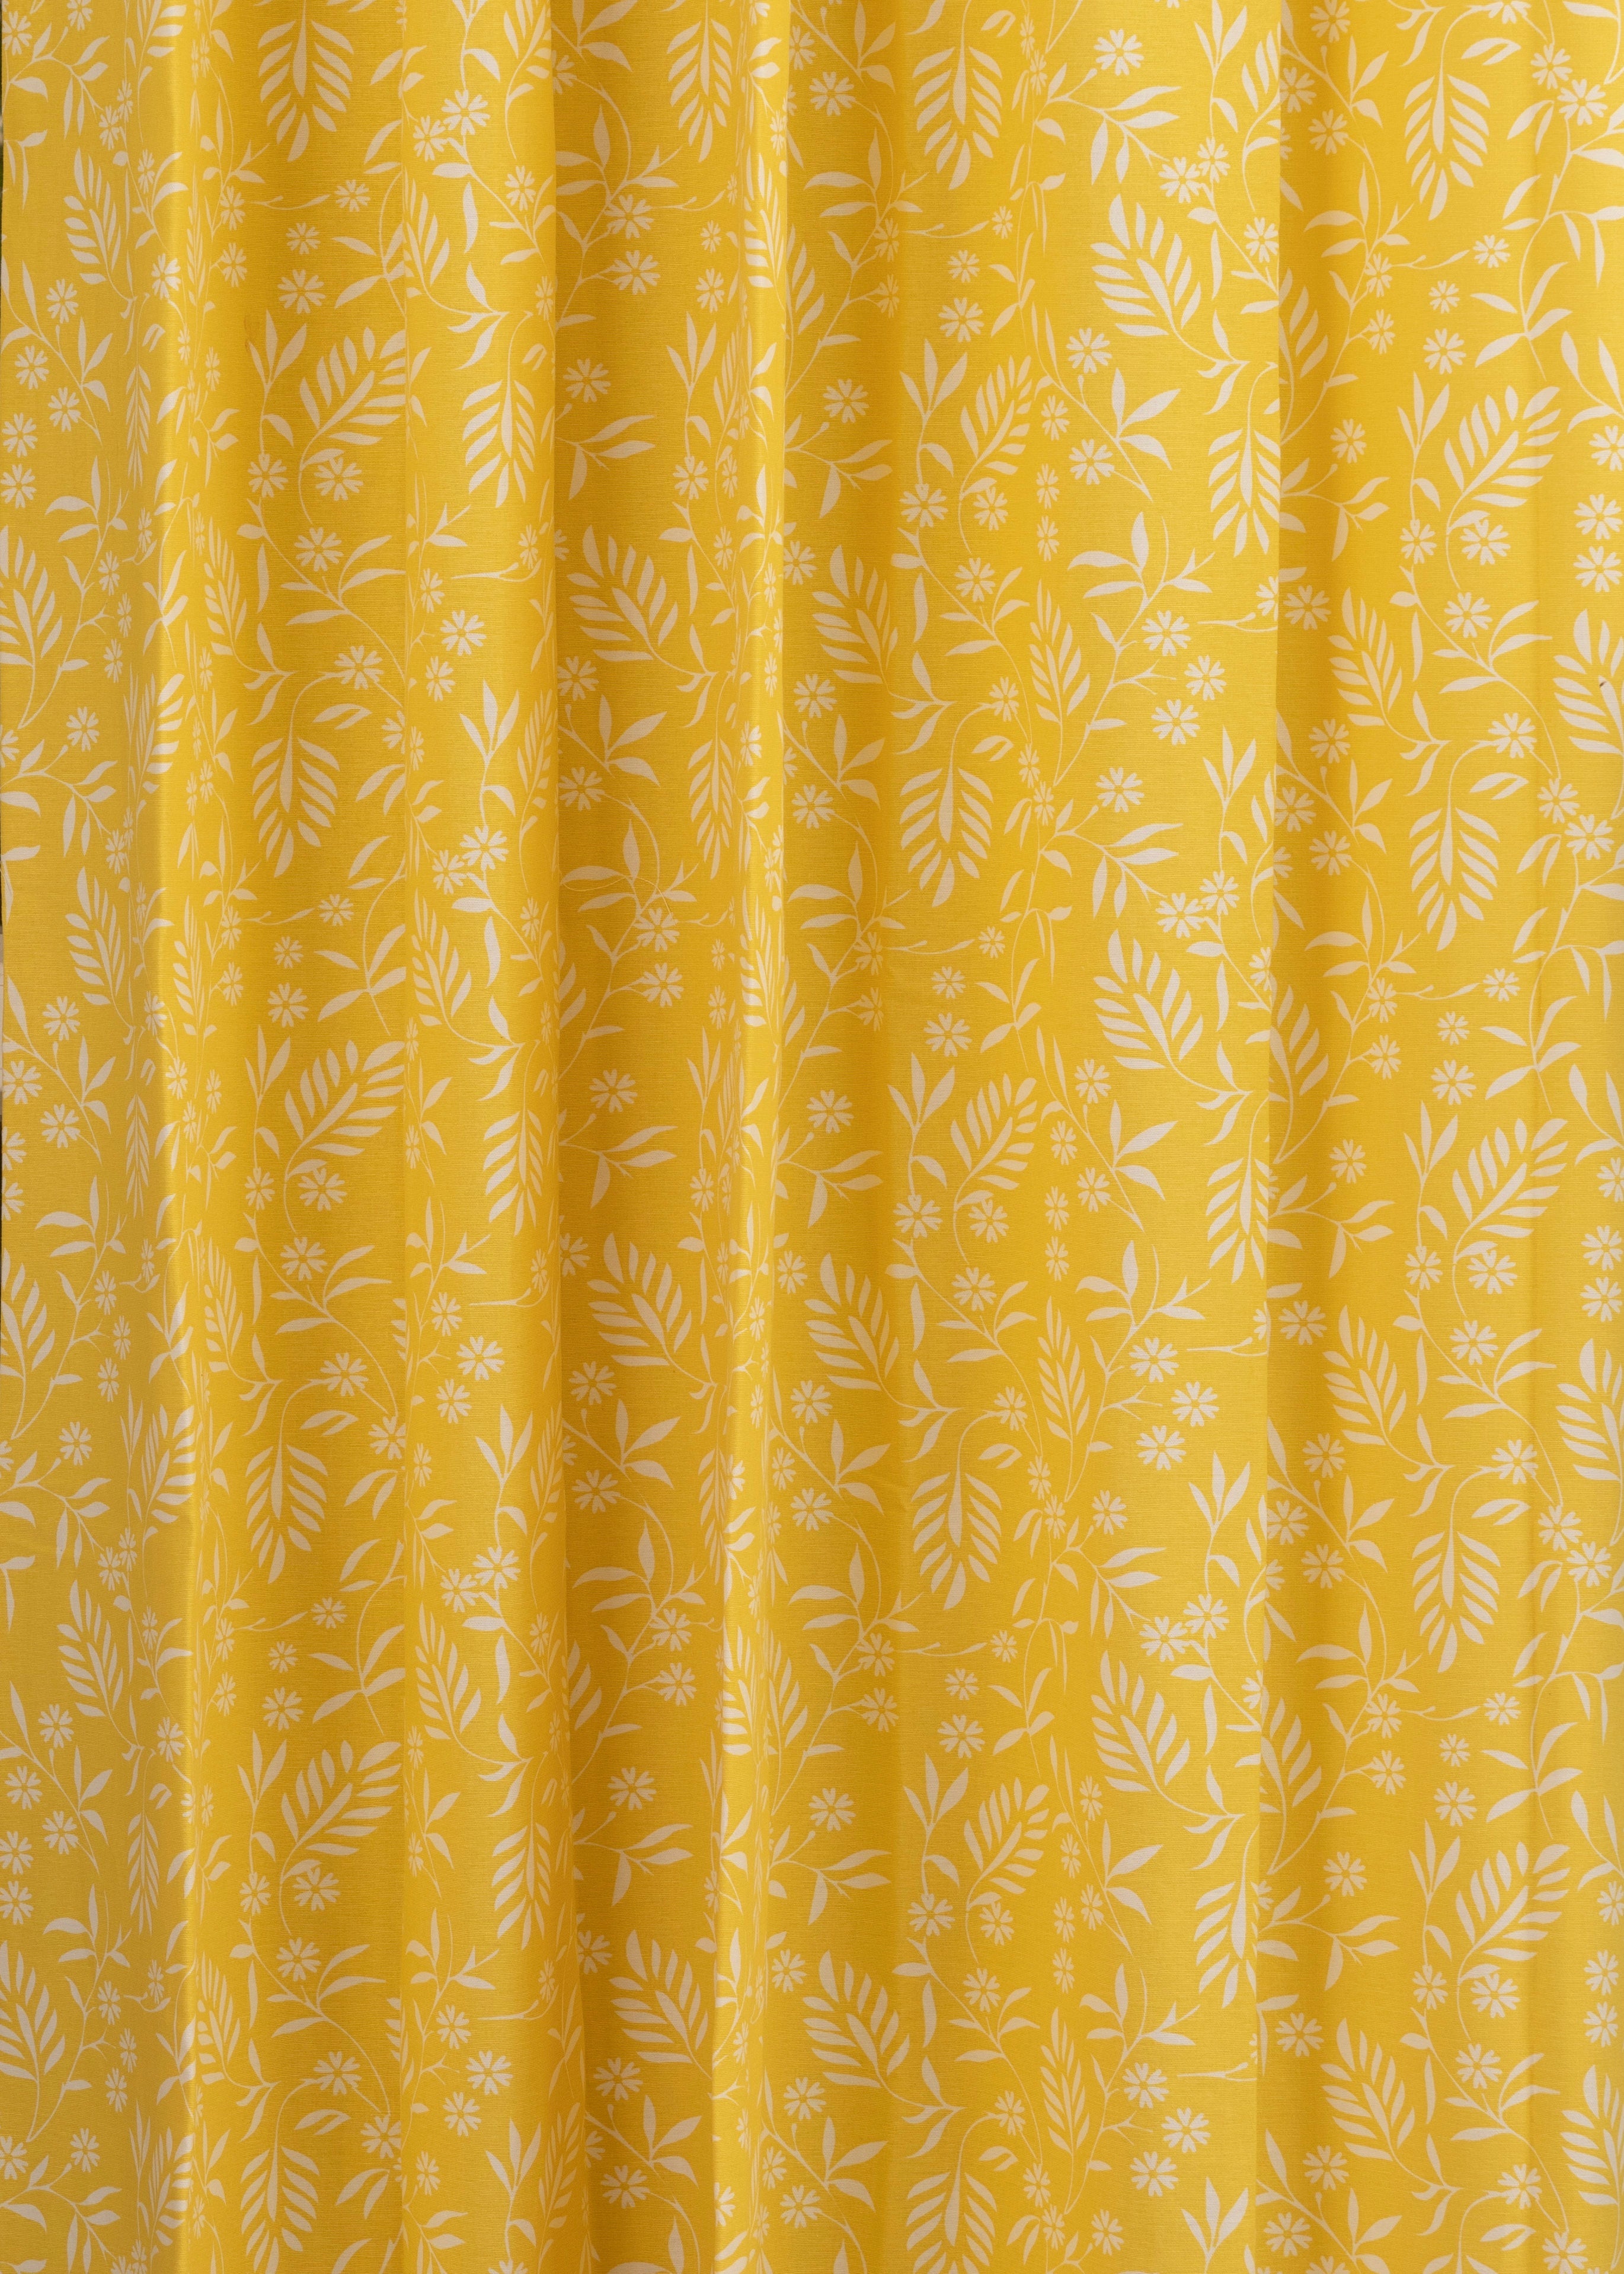 Yellow Daisy 100% cotton floral curtain for kids room, living room & bed room - Room darkening - Pack of 1